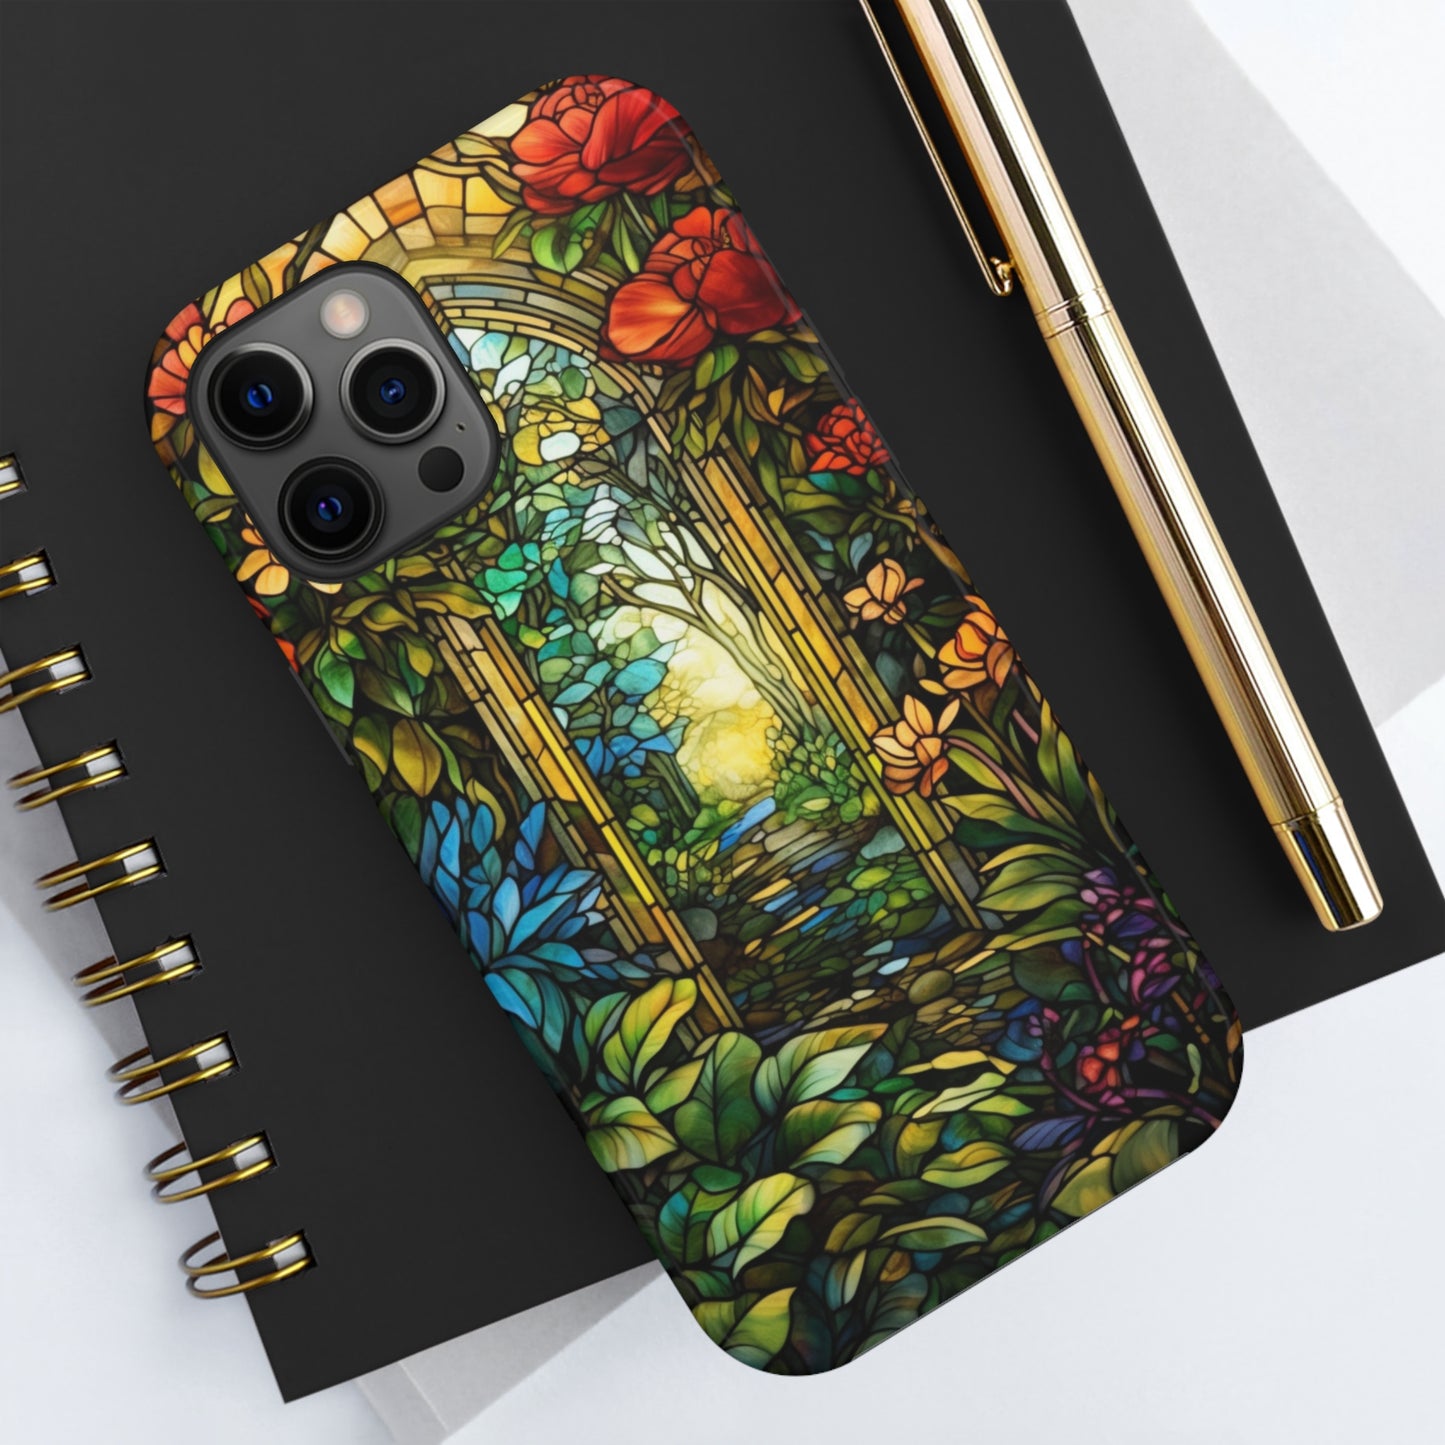 Secret Garden Stained Glass iPhone Tough Case | Unveil the Beauty of Nature with Reliable Protection